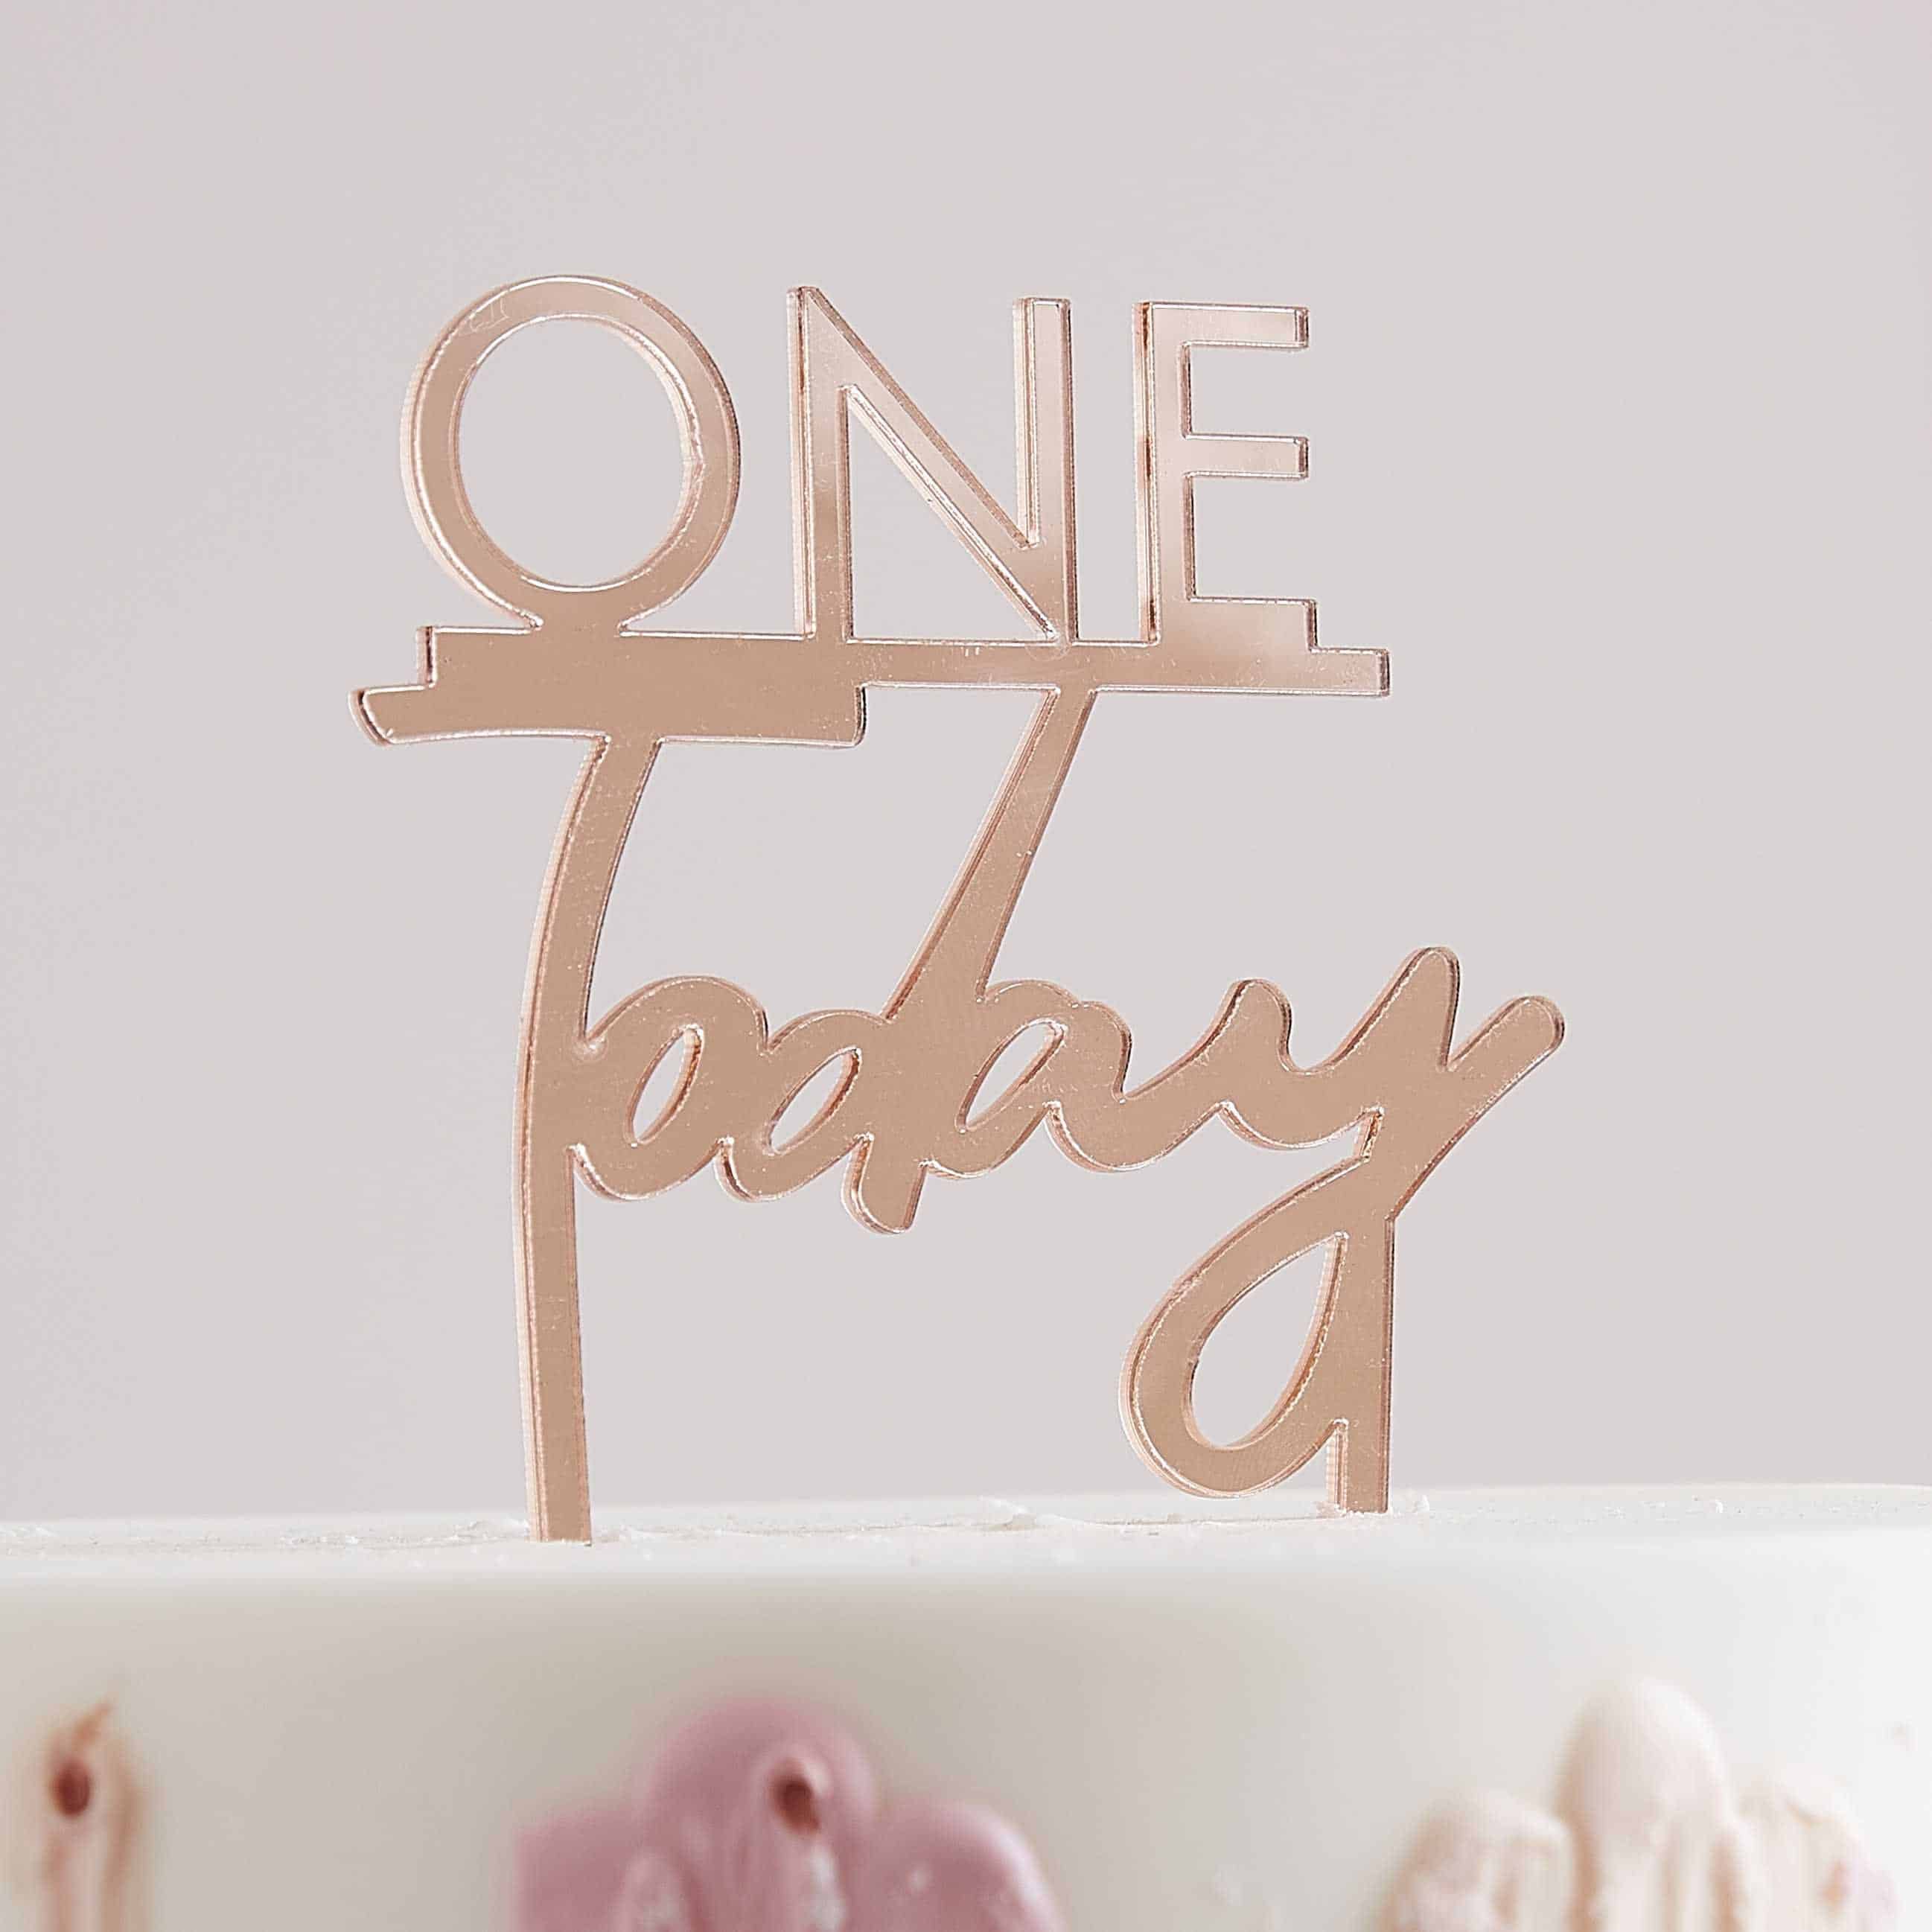 One today cake topper